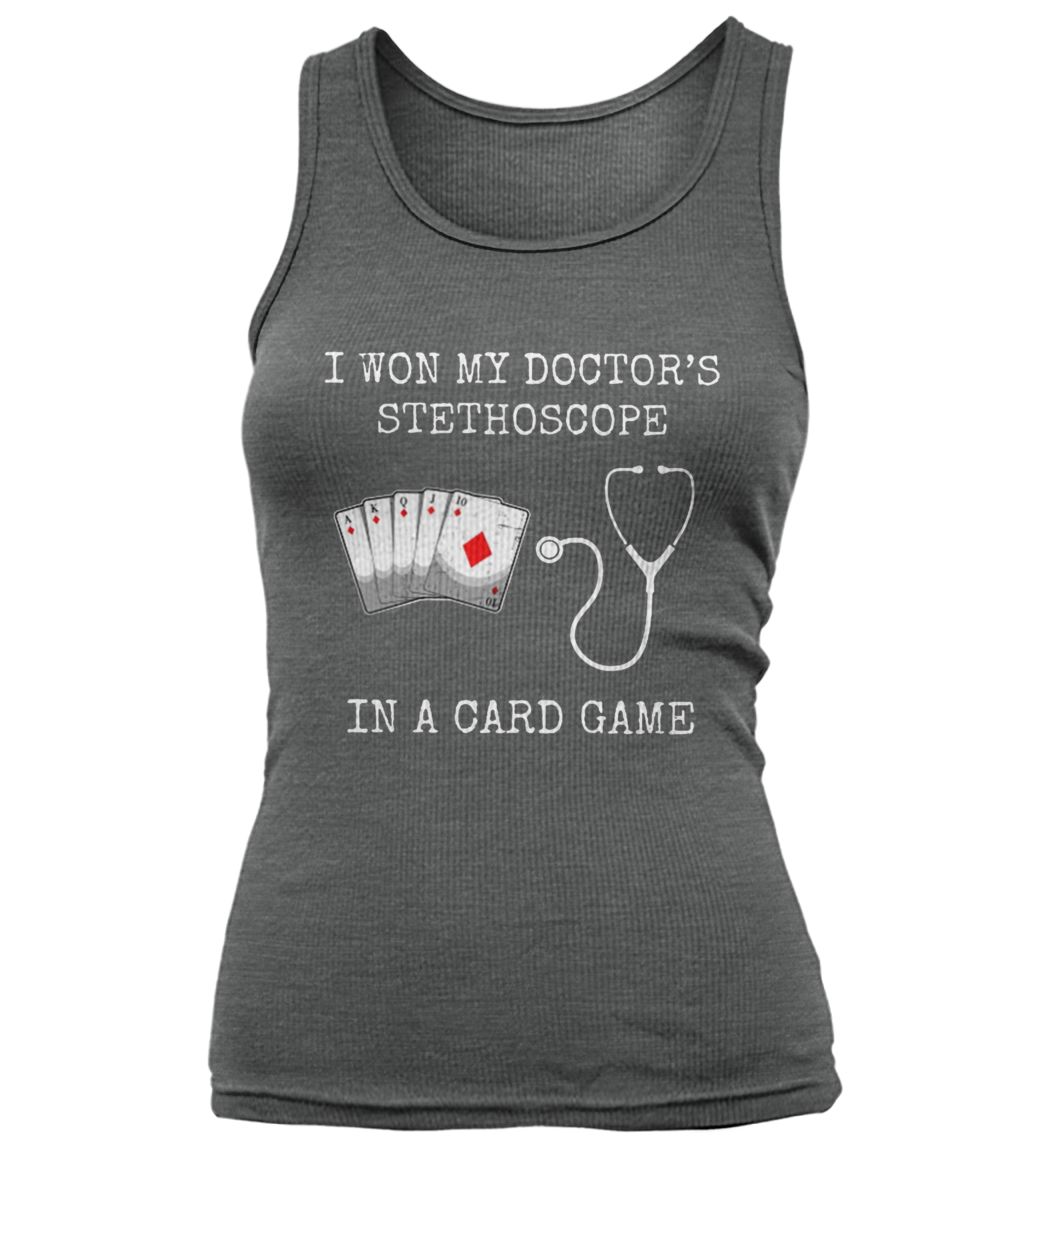 I won my doctor's stethoscope in a card game nurse playing cards women's tank top